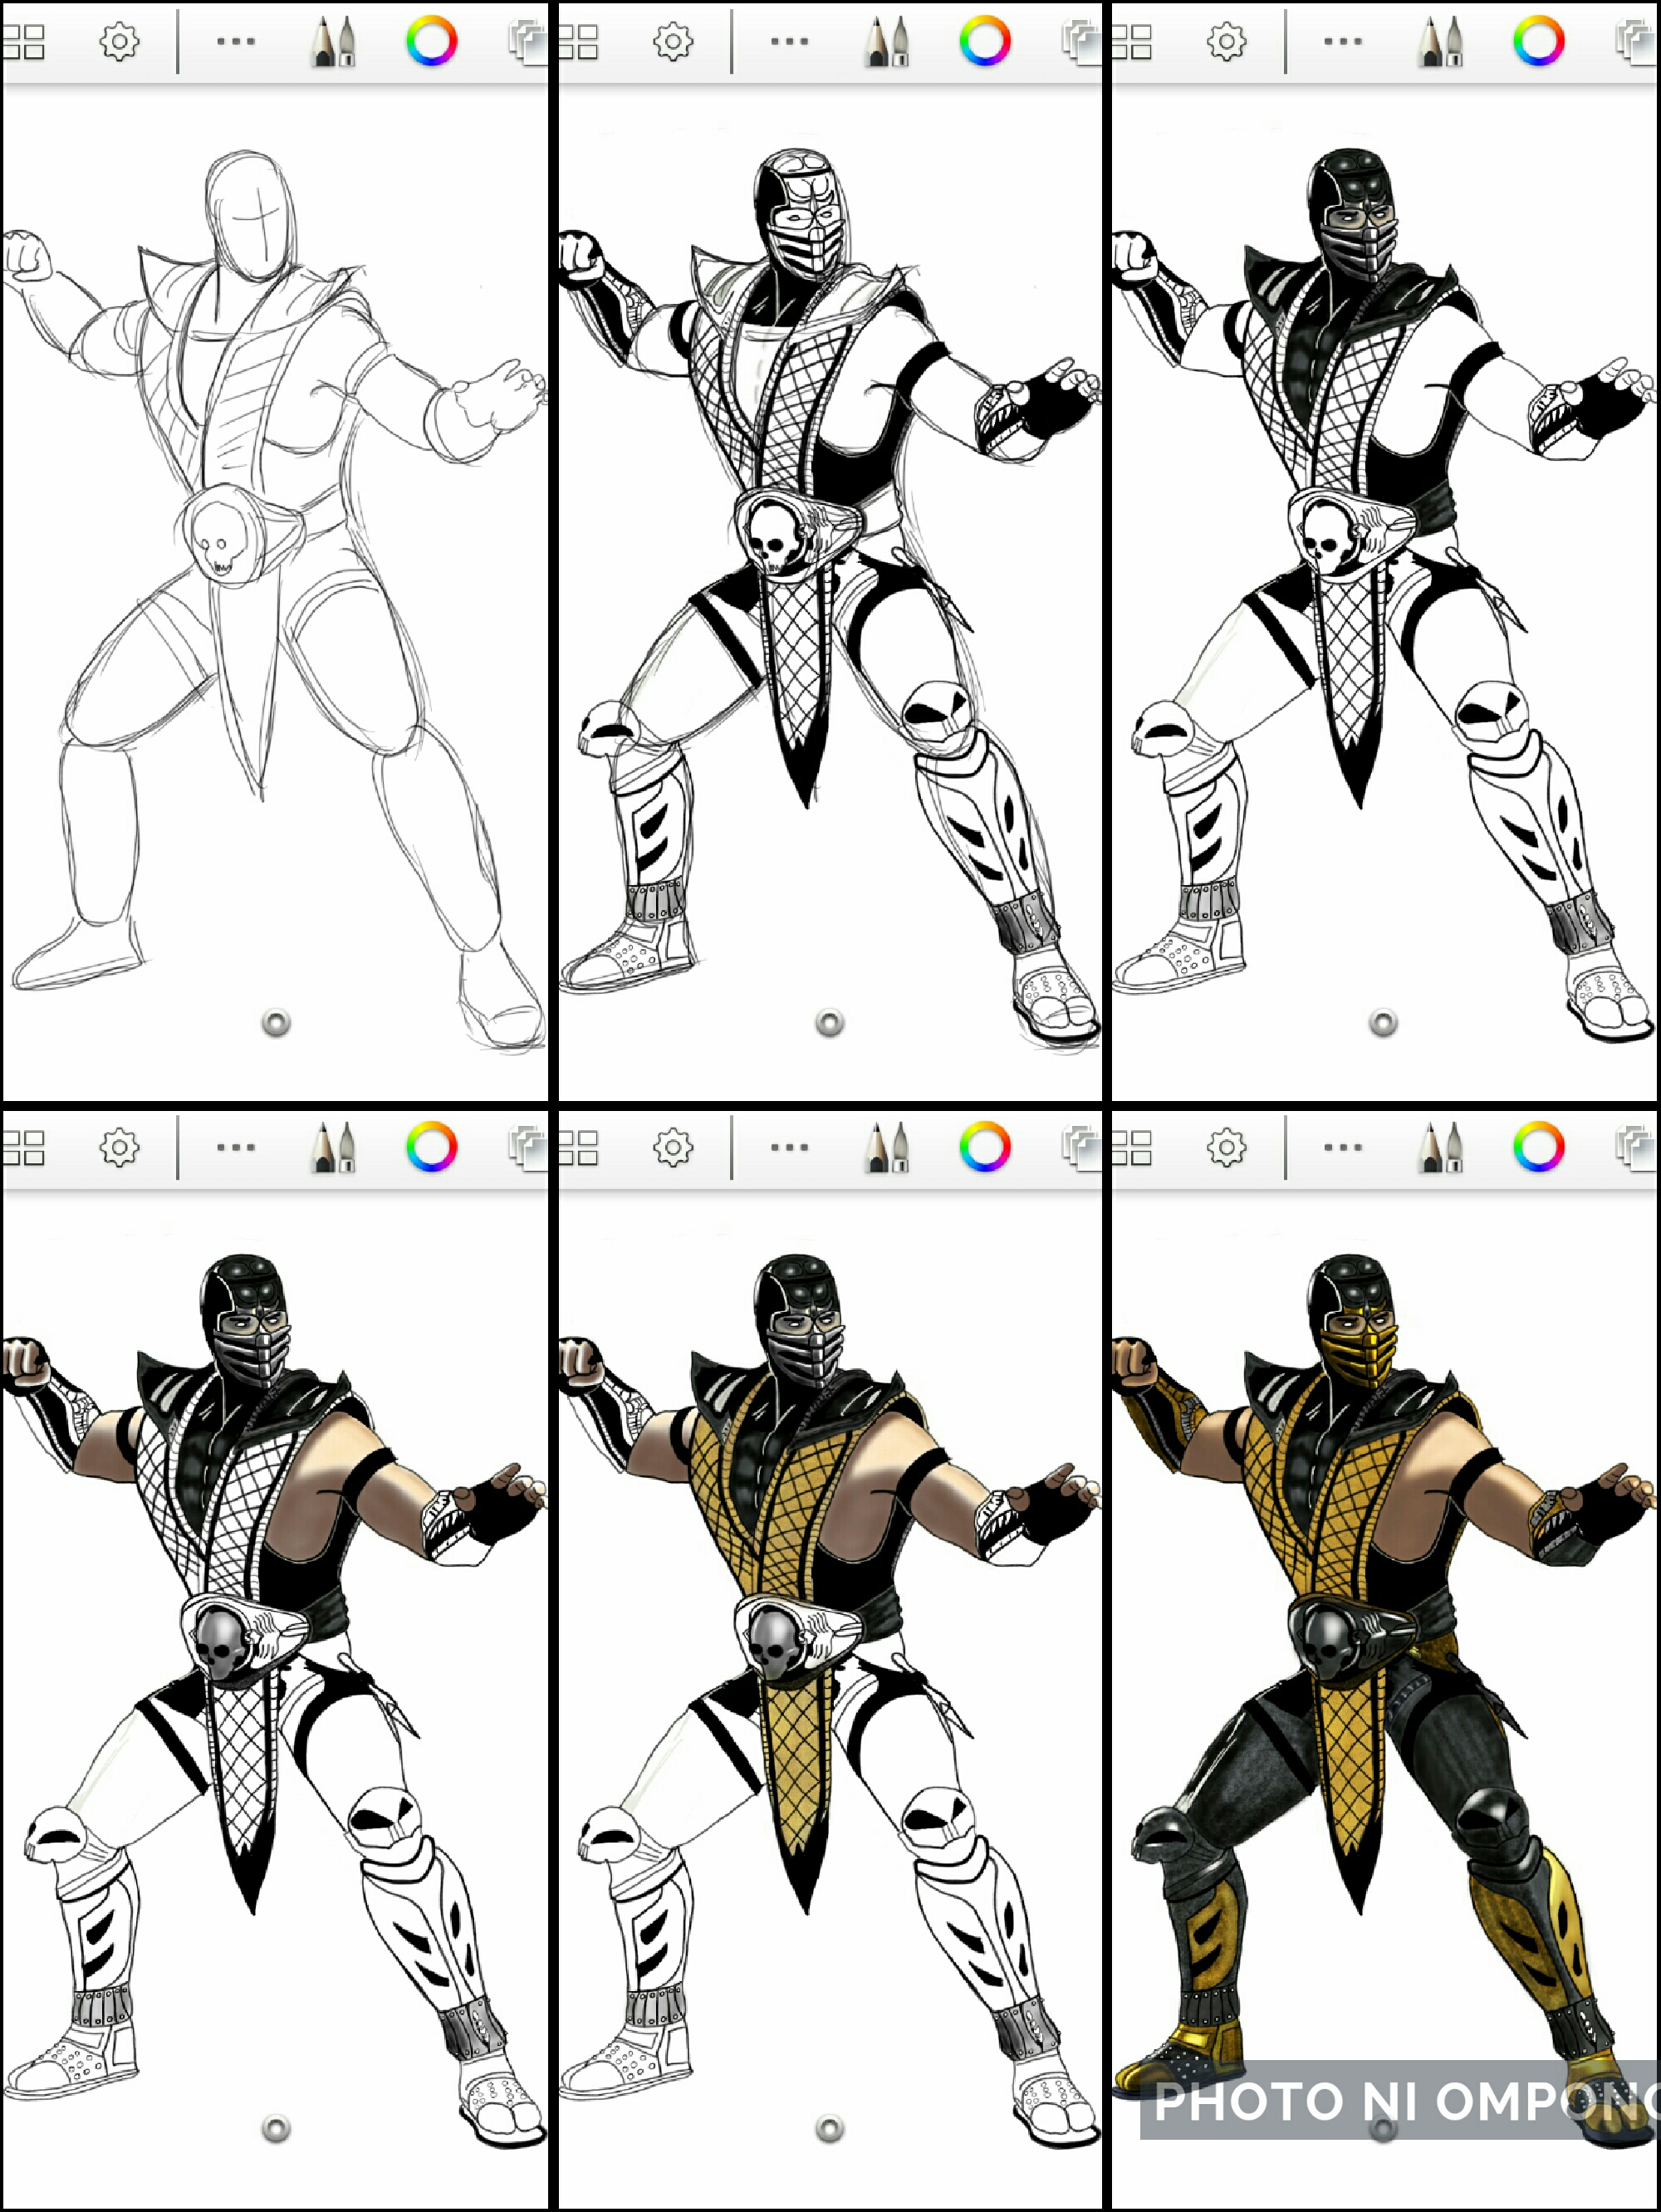 Drawing ERMAC from Mortal Kombat - Step By Step - — Steemit